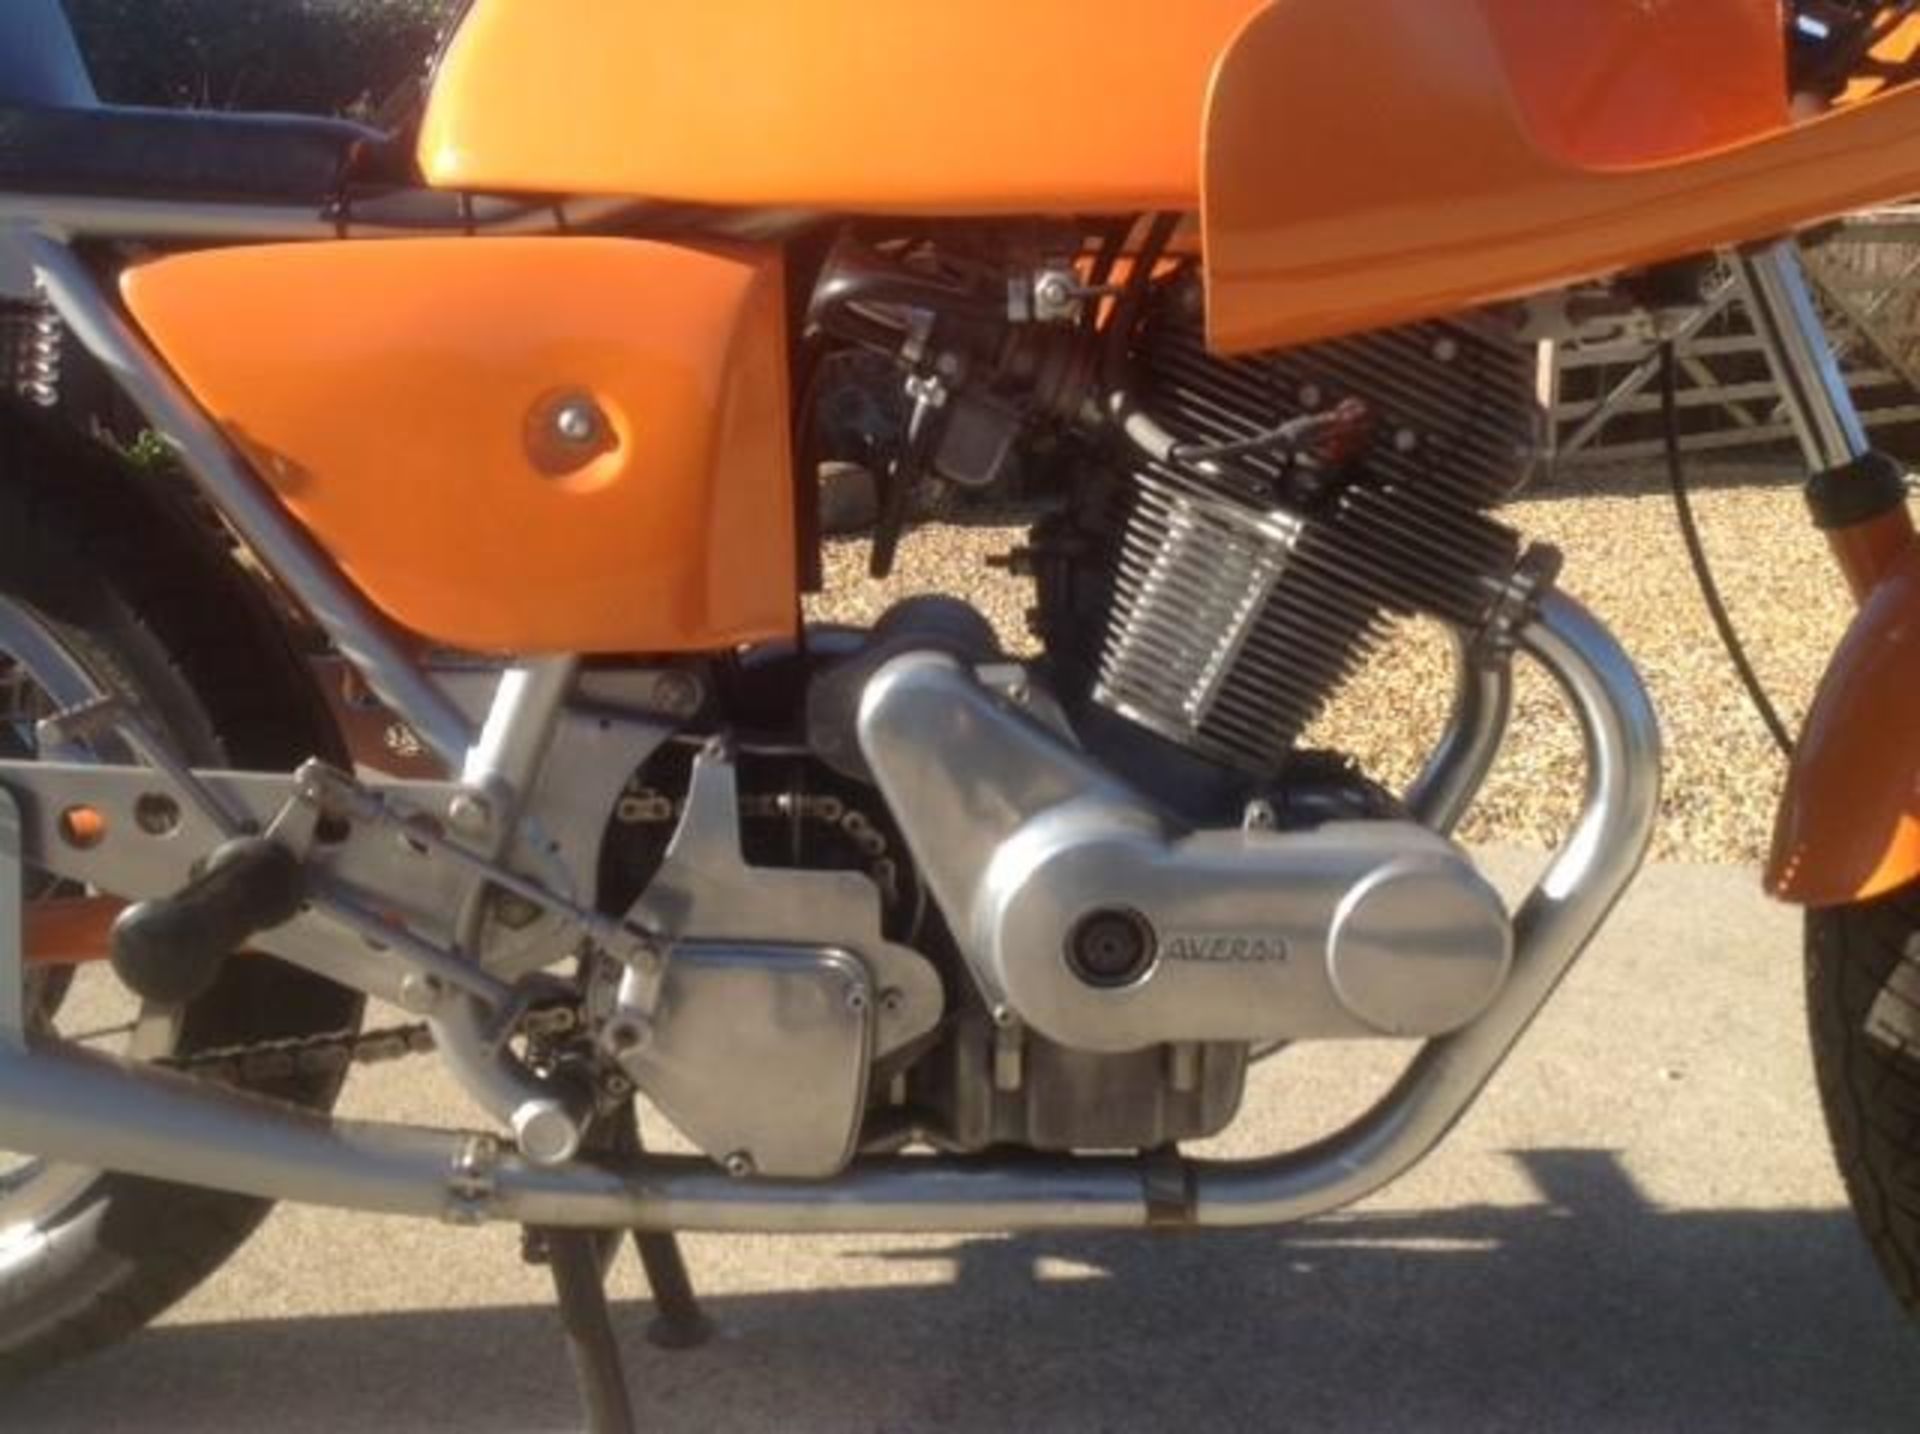 Laverda 750 FSC replica motorcycle. 1972. Matching numbers. Runs and rides, last ridden in 2012. - Image 5 of 6